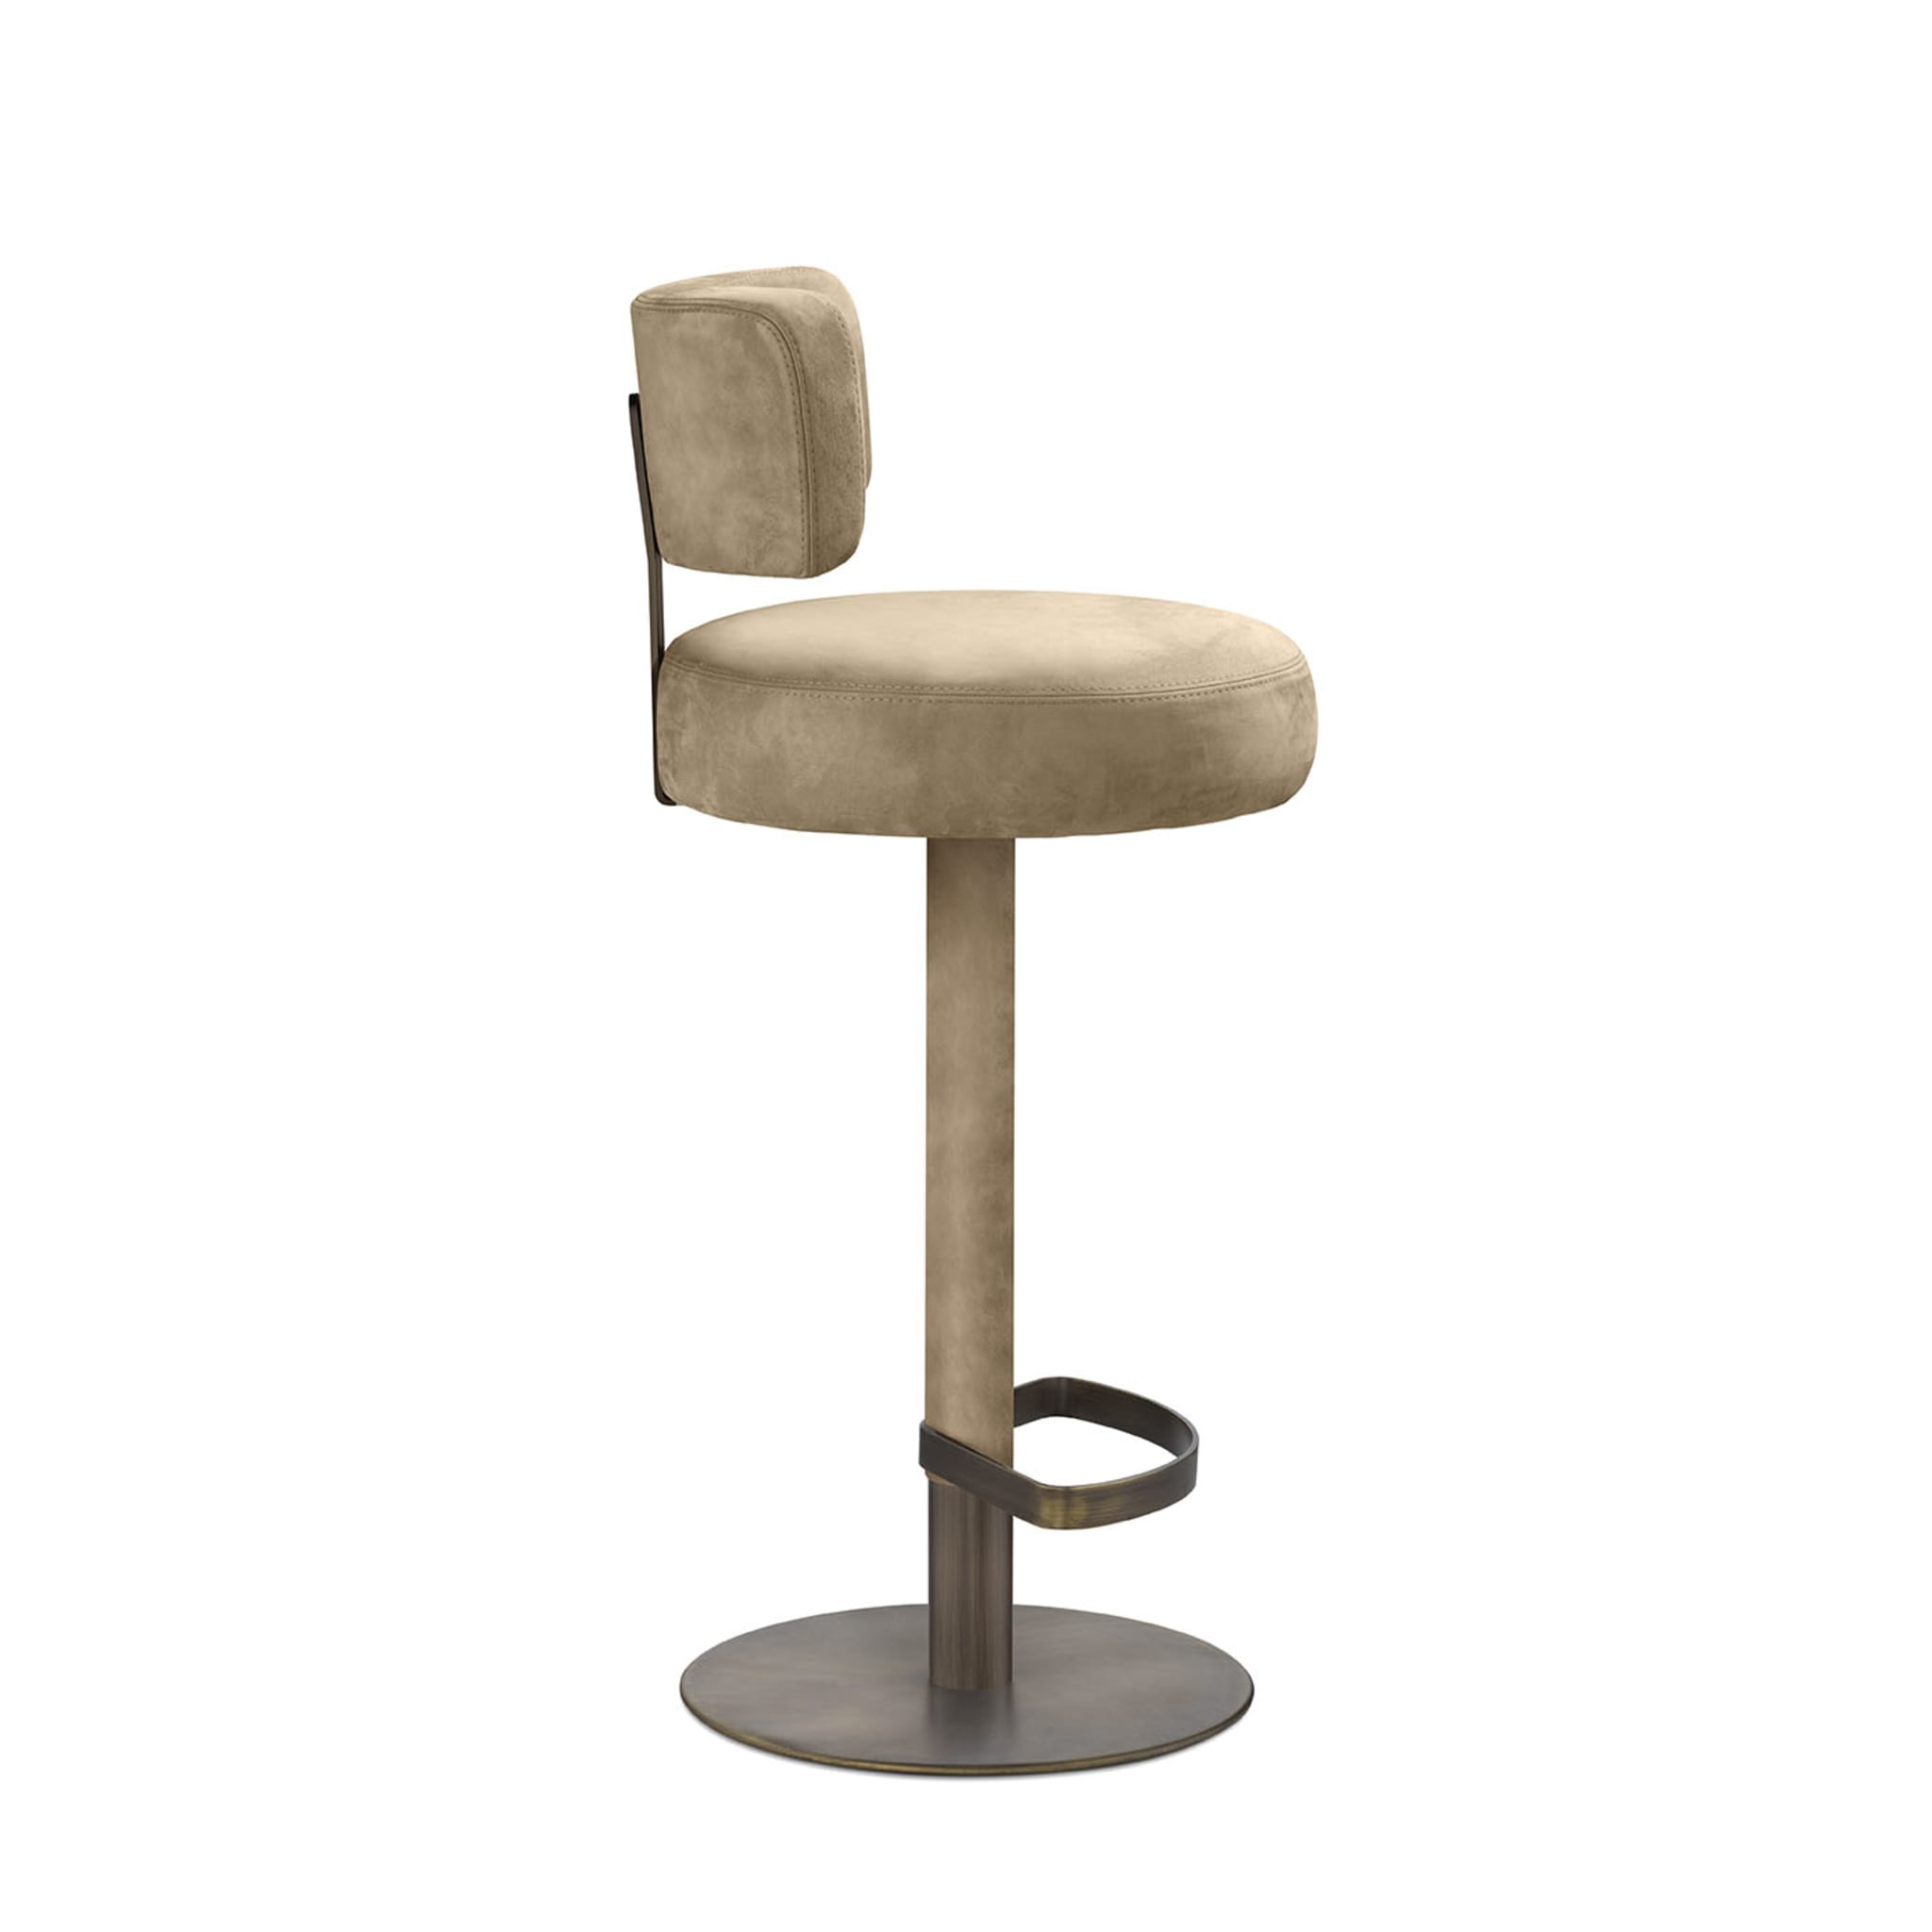 Alfred fixed Bar Stool - Alternative view 4